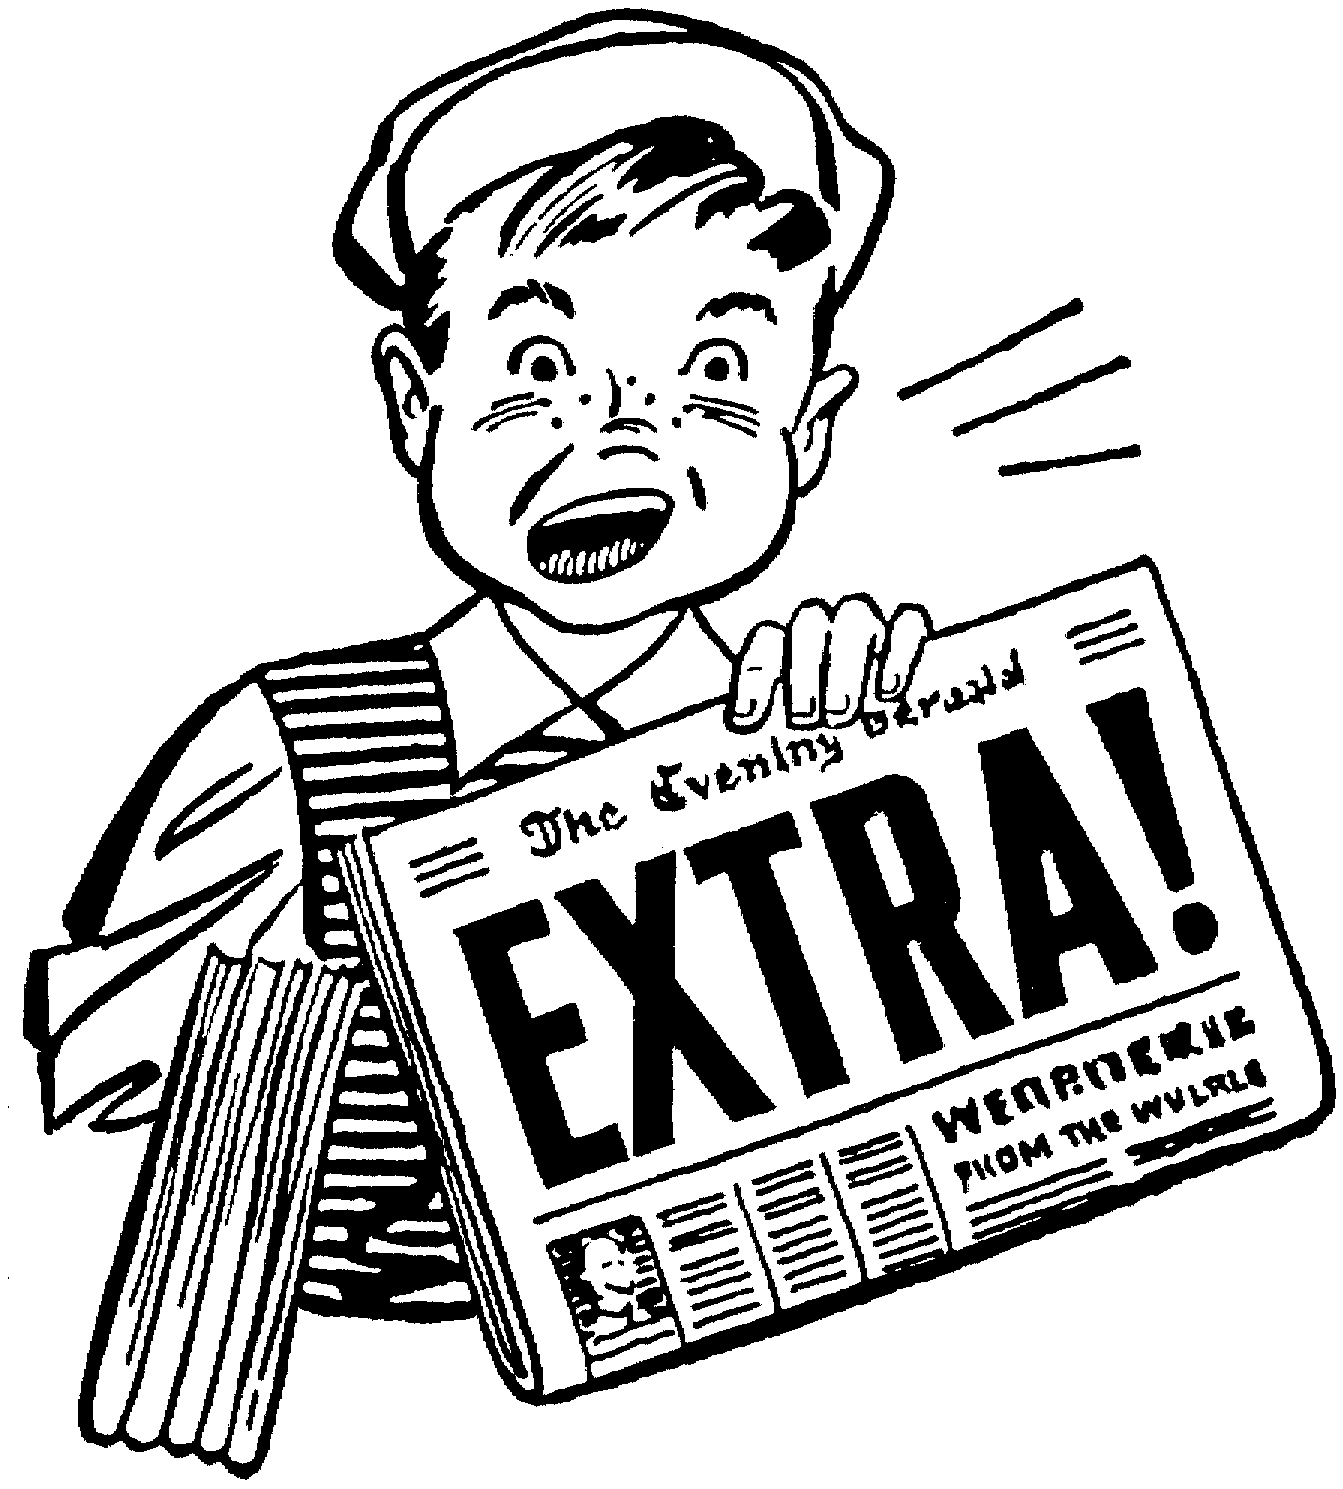 clipart of a newspaper - photo #29